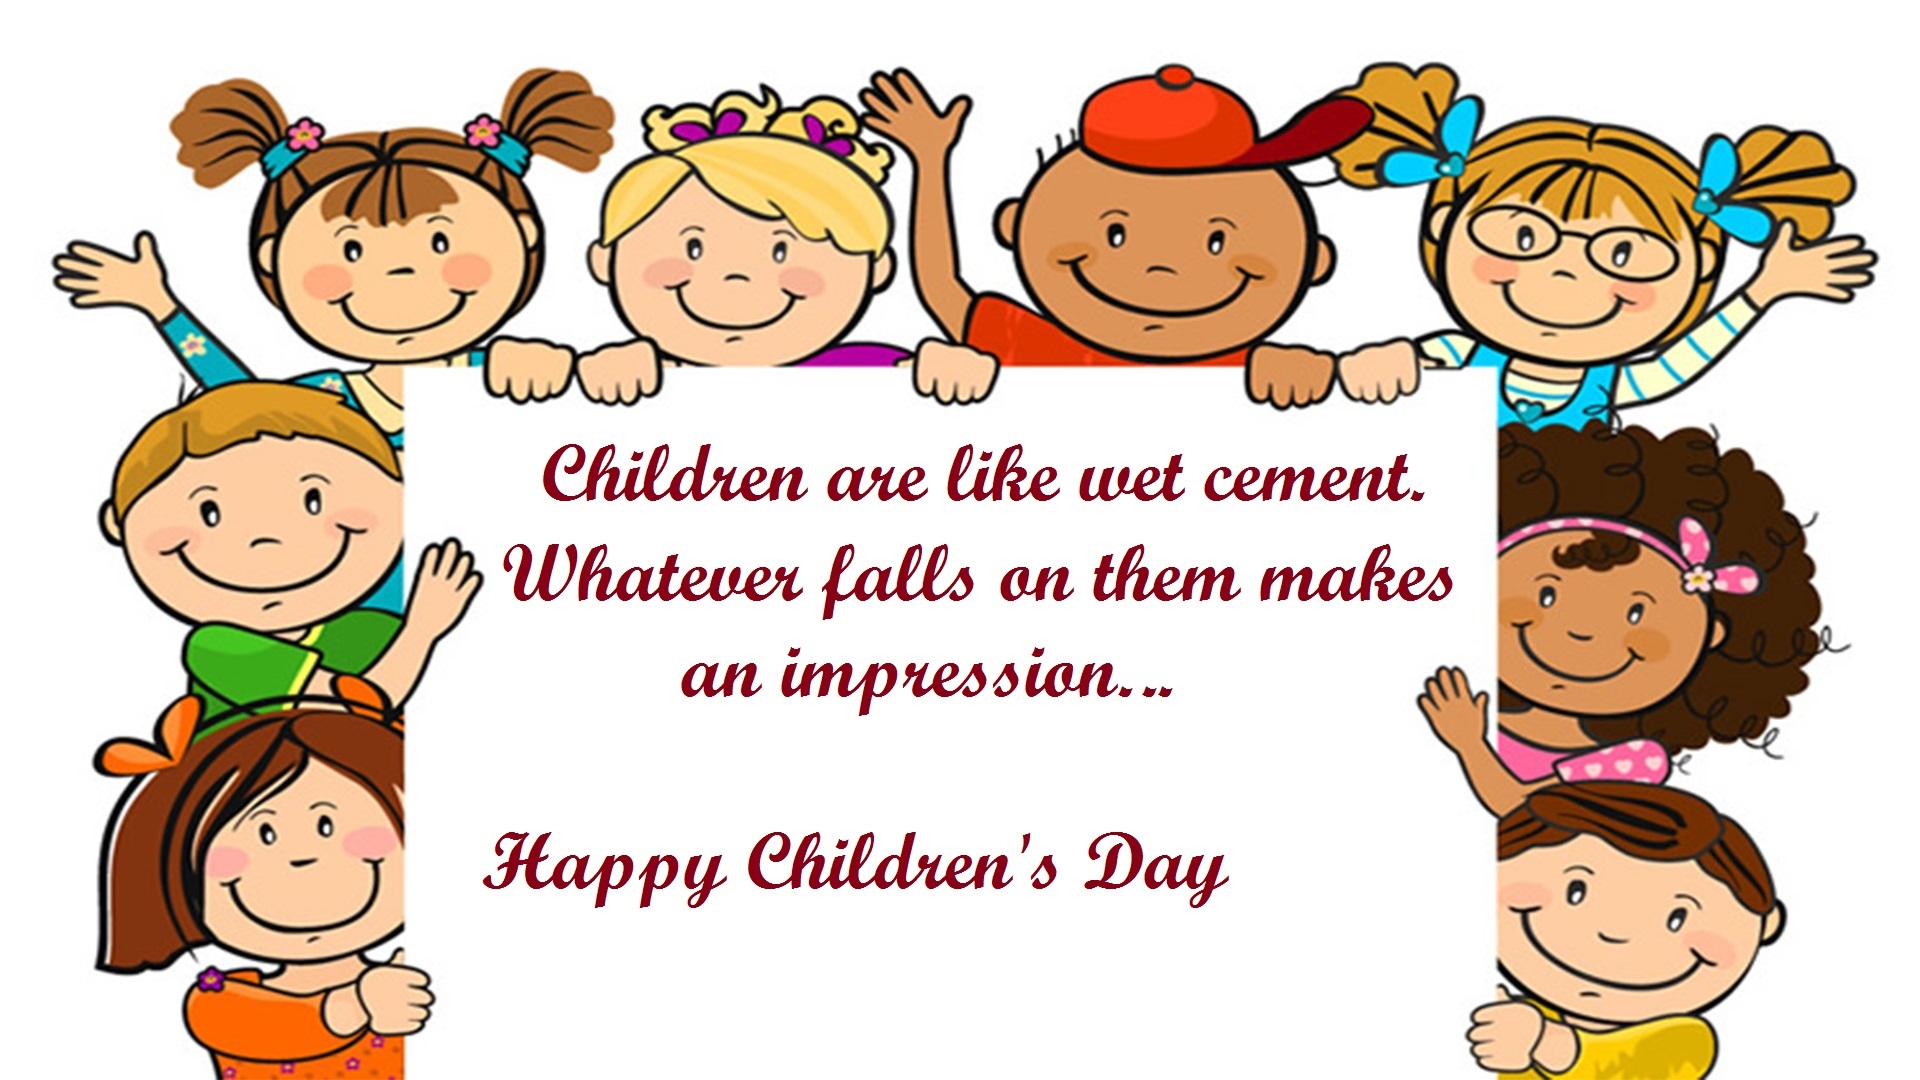 childrens day quotes image hd